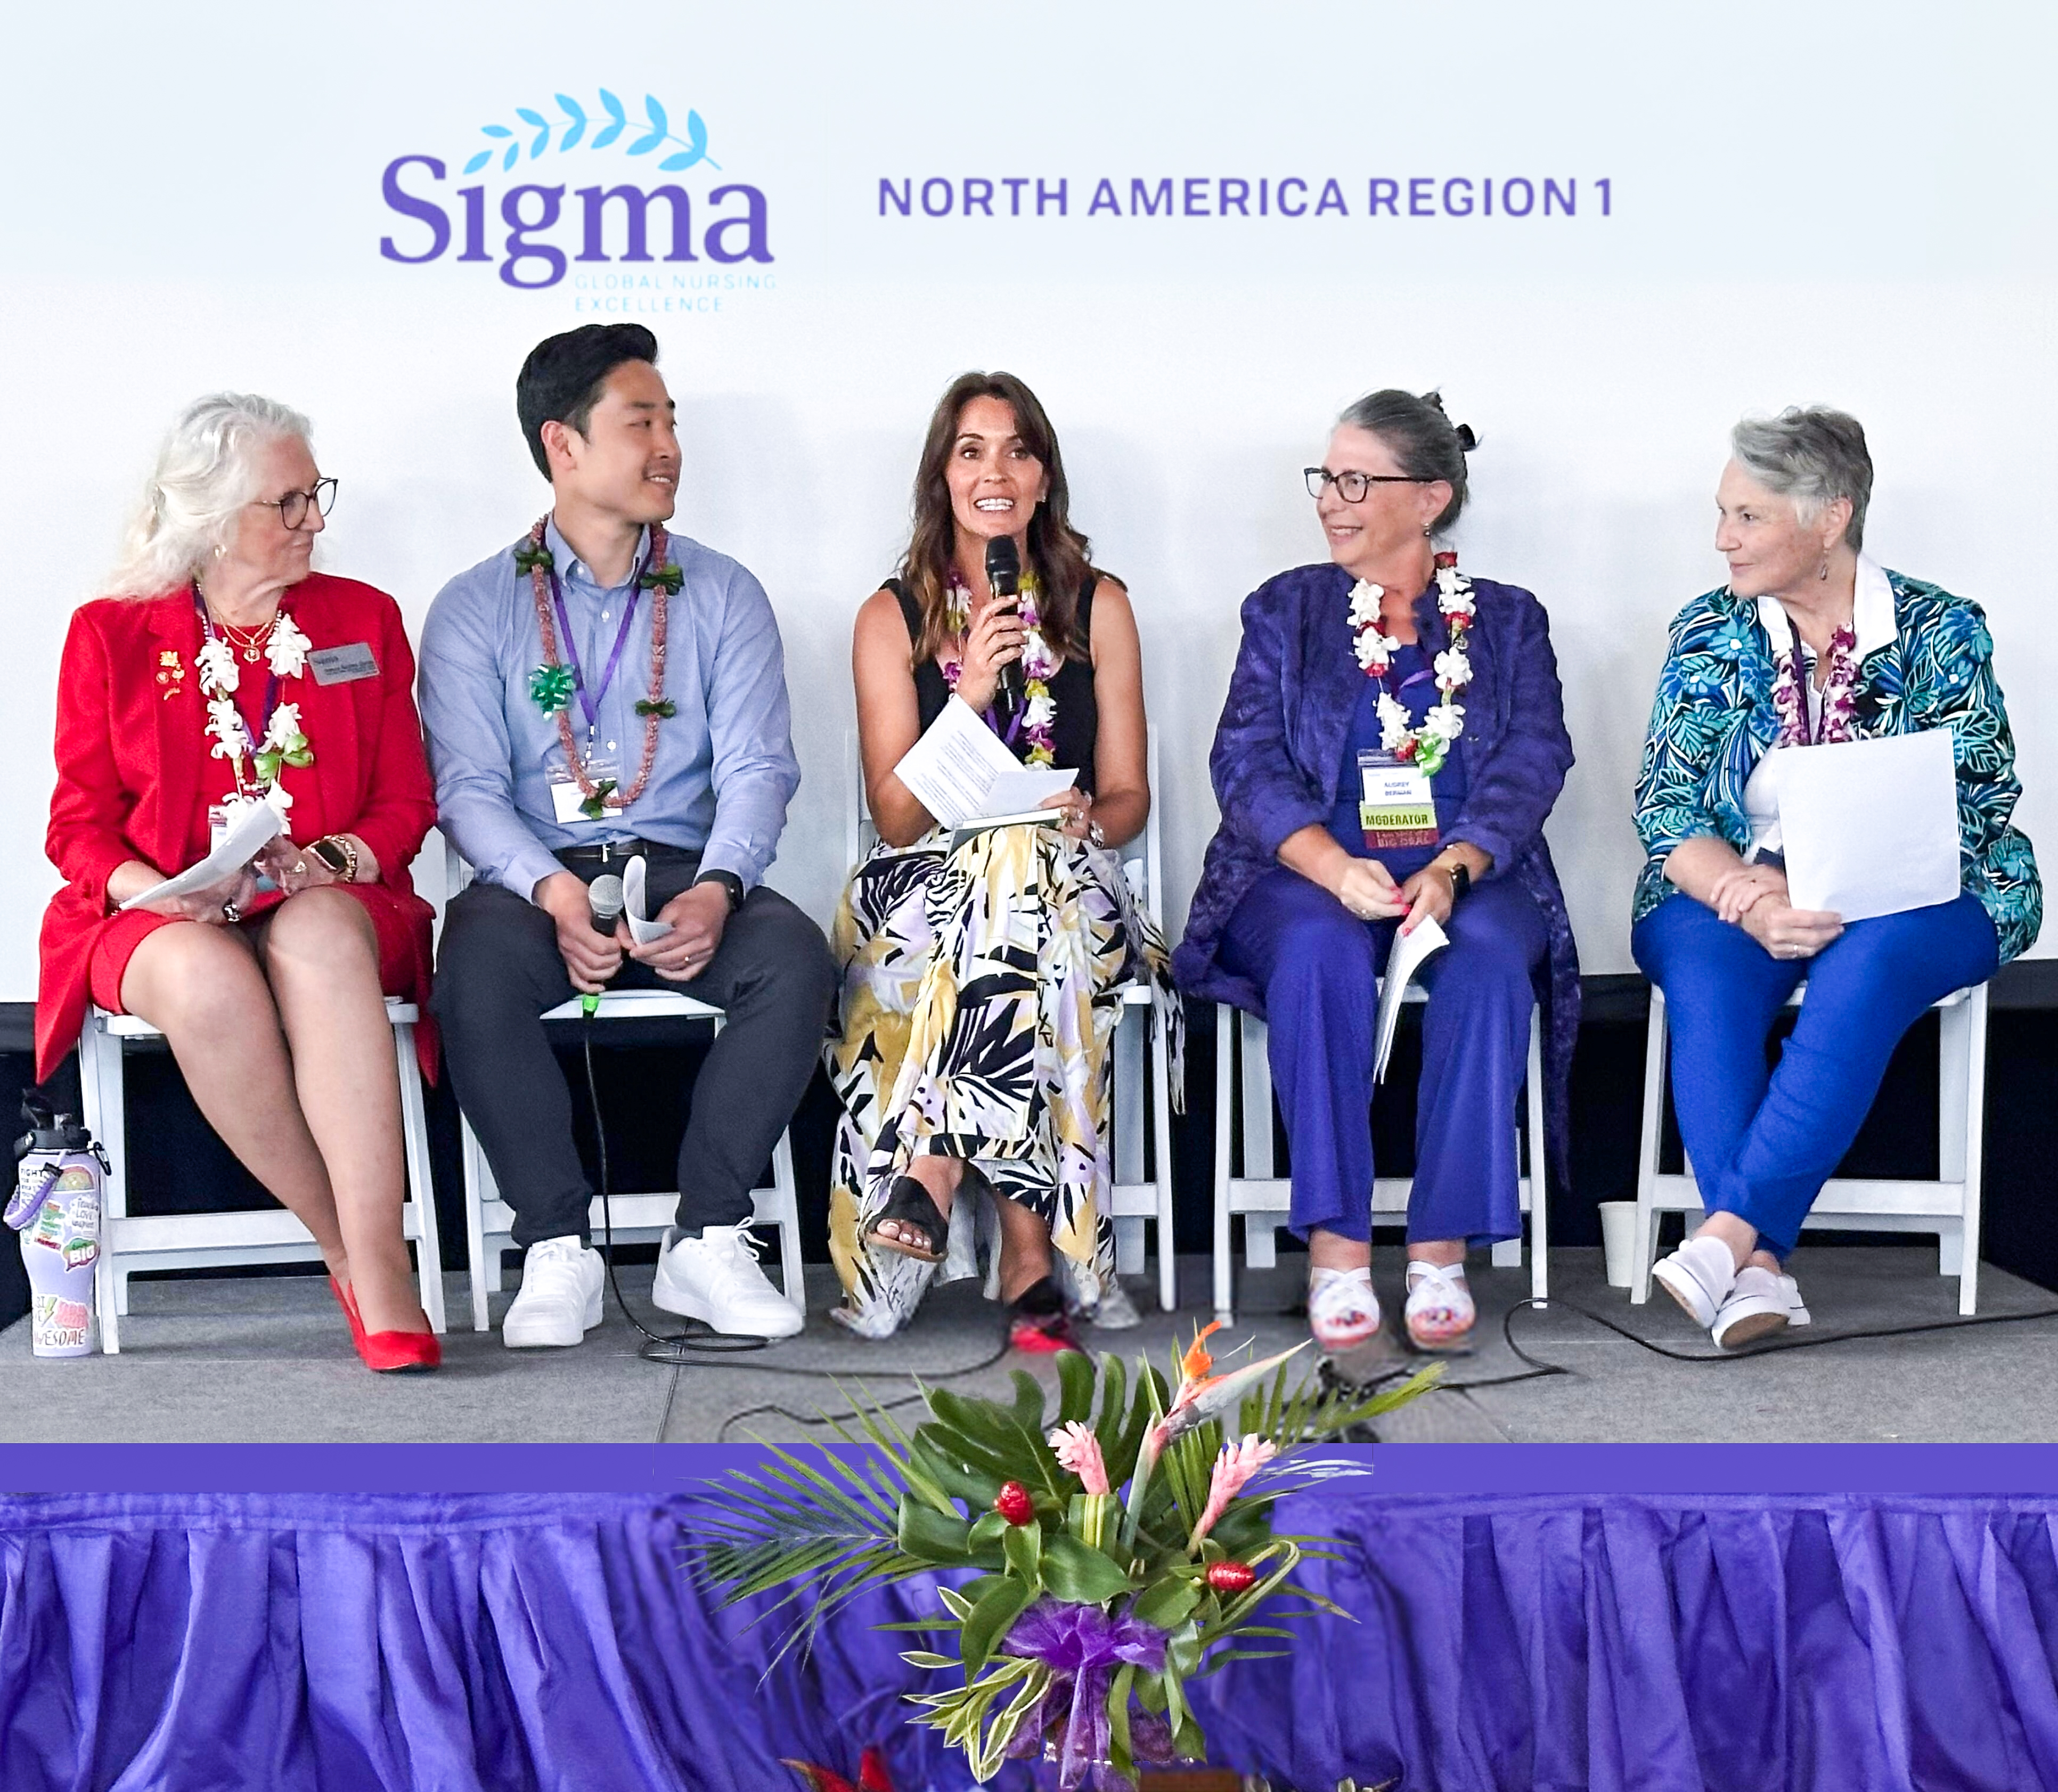 Jessica Nishikawa (center) speaking at one of the leadership panels she participated in at the Sigma conference